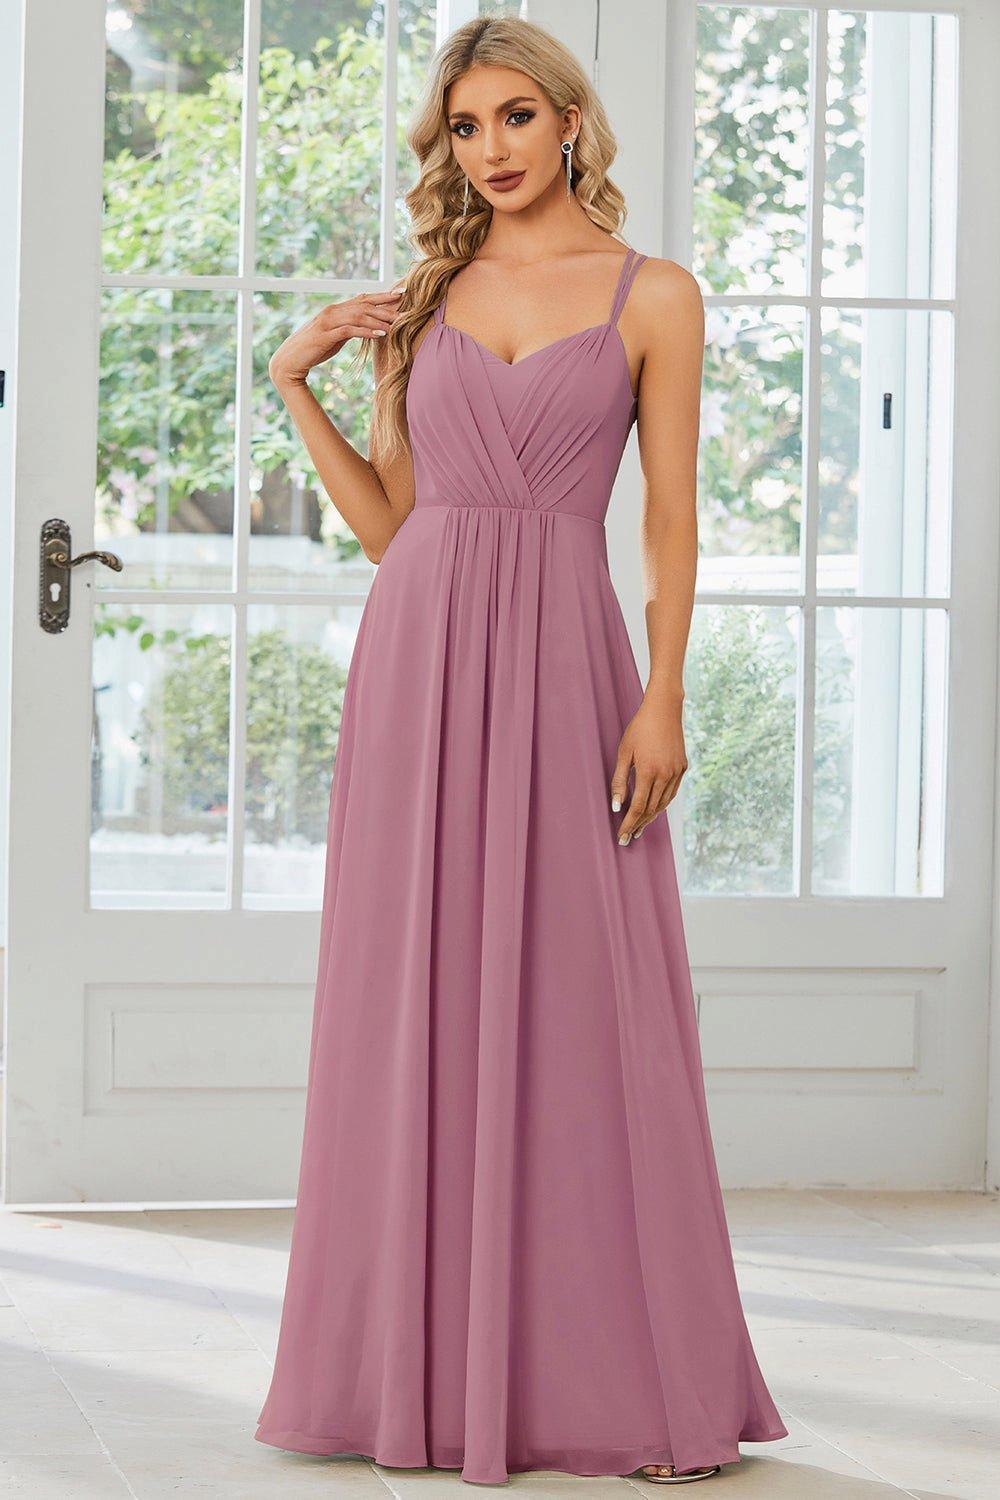 Buy Lavender Bridesmaid Dress Online In India - Etsy India